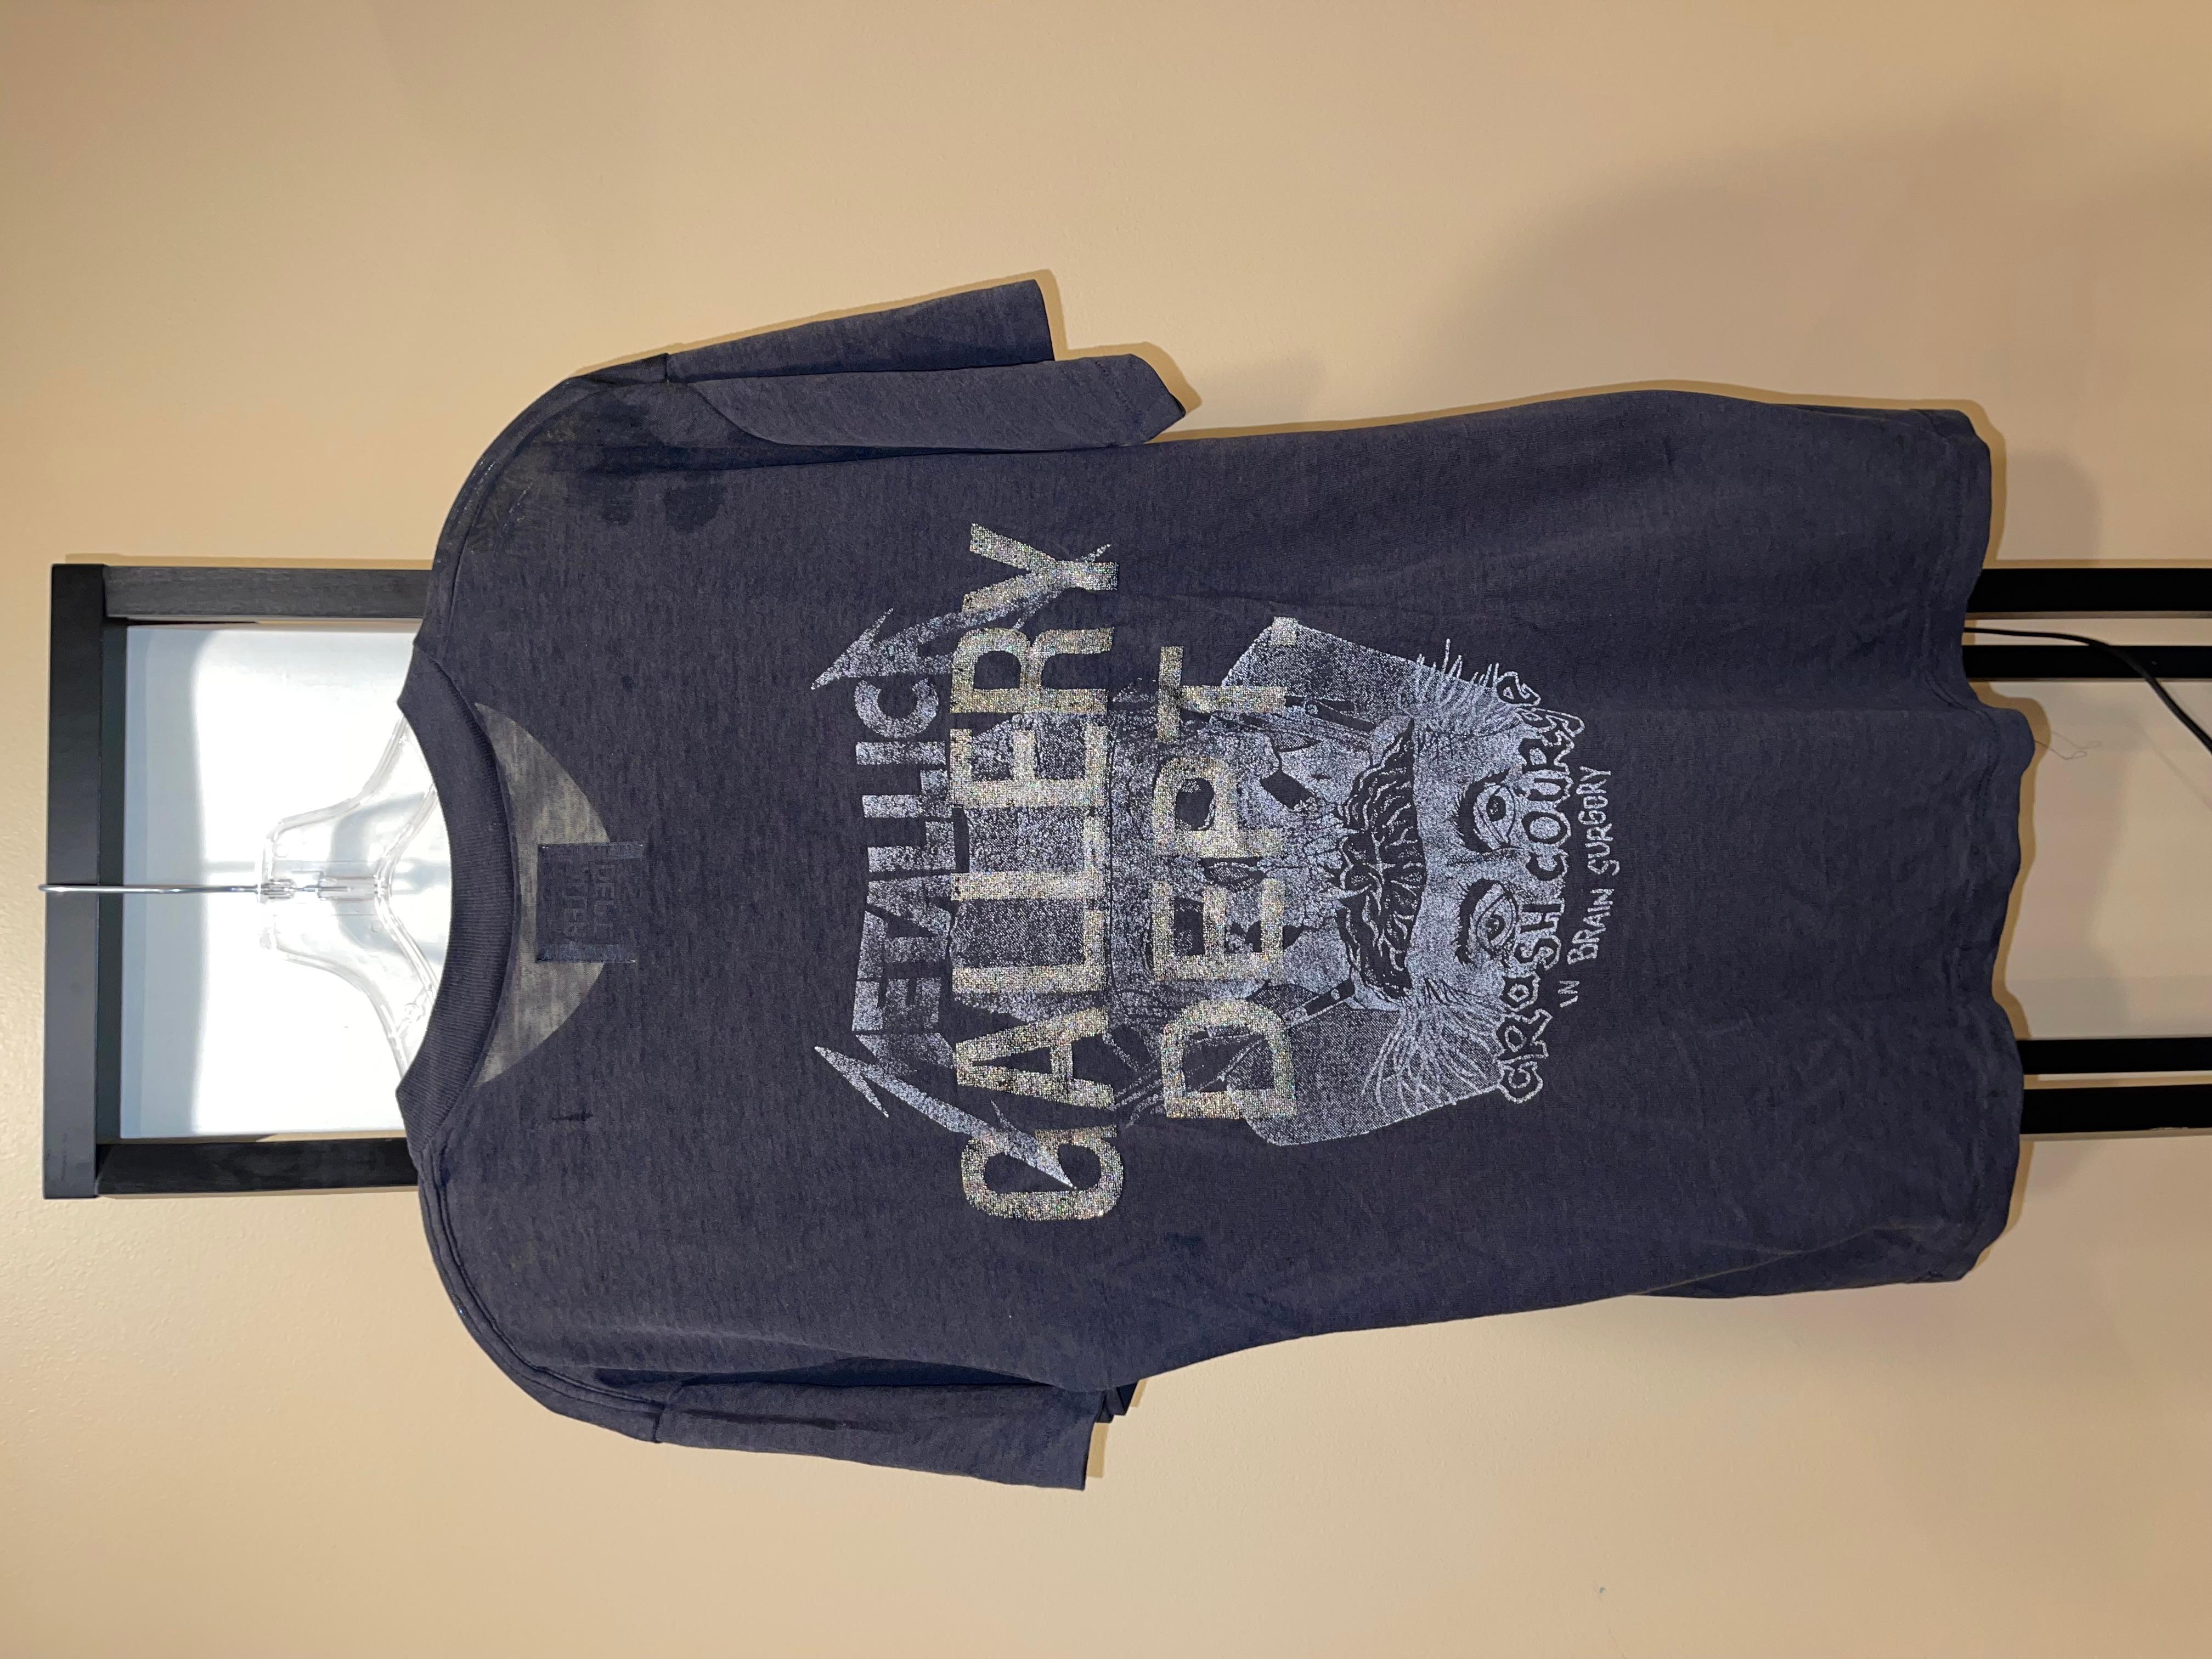 Gallery Dept Metallica “Sad But True” Tee
Size Medium
Vintage Tee from the early 90s
Amazing Fade
EXTREMELY RARE and LIMITED Gallery Dept vintage tee. This tee is a 1 of 1 from Gallery Dept. Was told a total of 40 vintage tees were made (all